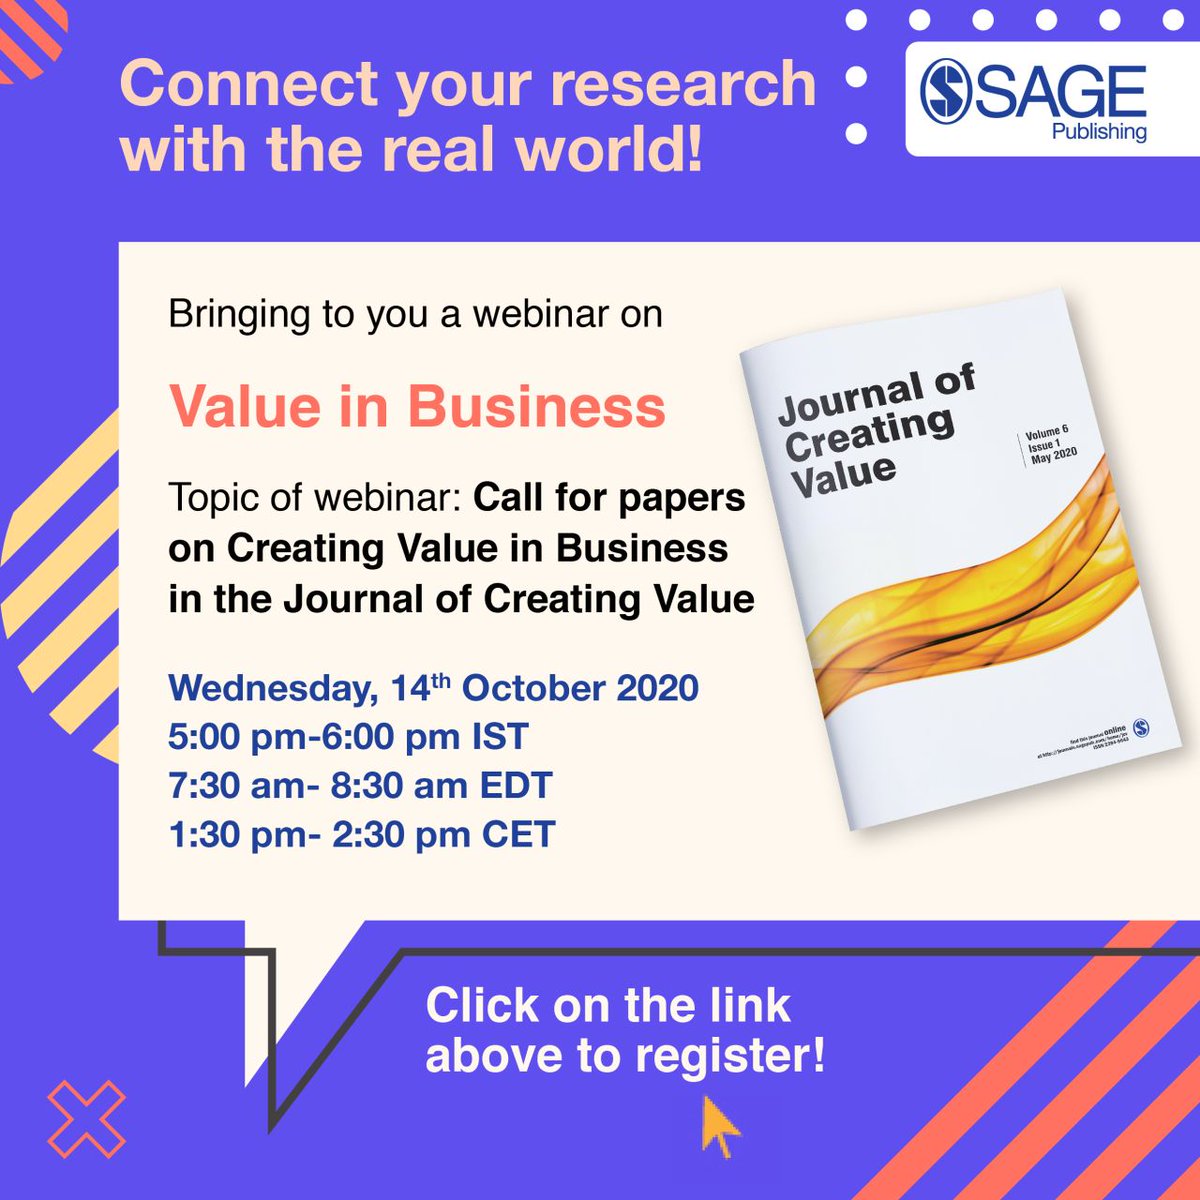 Join us for a webinar on “Value in Business” on 14th October 2020 @ 5:00 PM IST
Register for the webinar at bit.ly/3cilGSU #JournalofCreatingValue #SAGEJournals #Webinar #OnlineEvent #callforpapers #specialissue #Valuecreation #ValueinBusiness